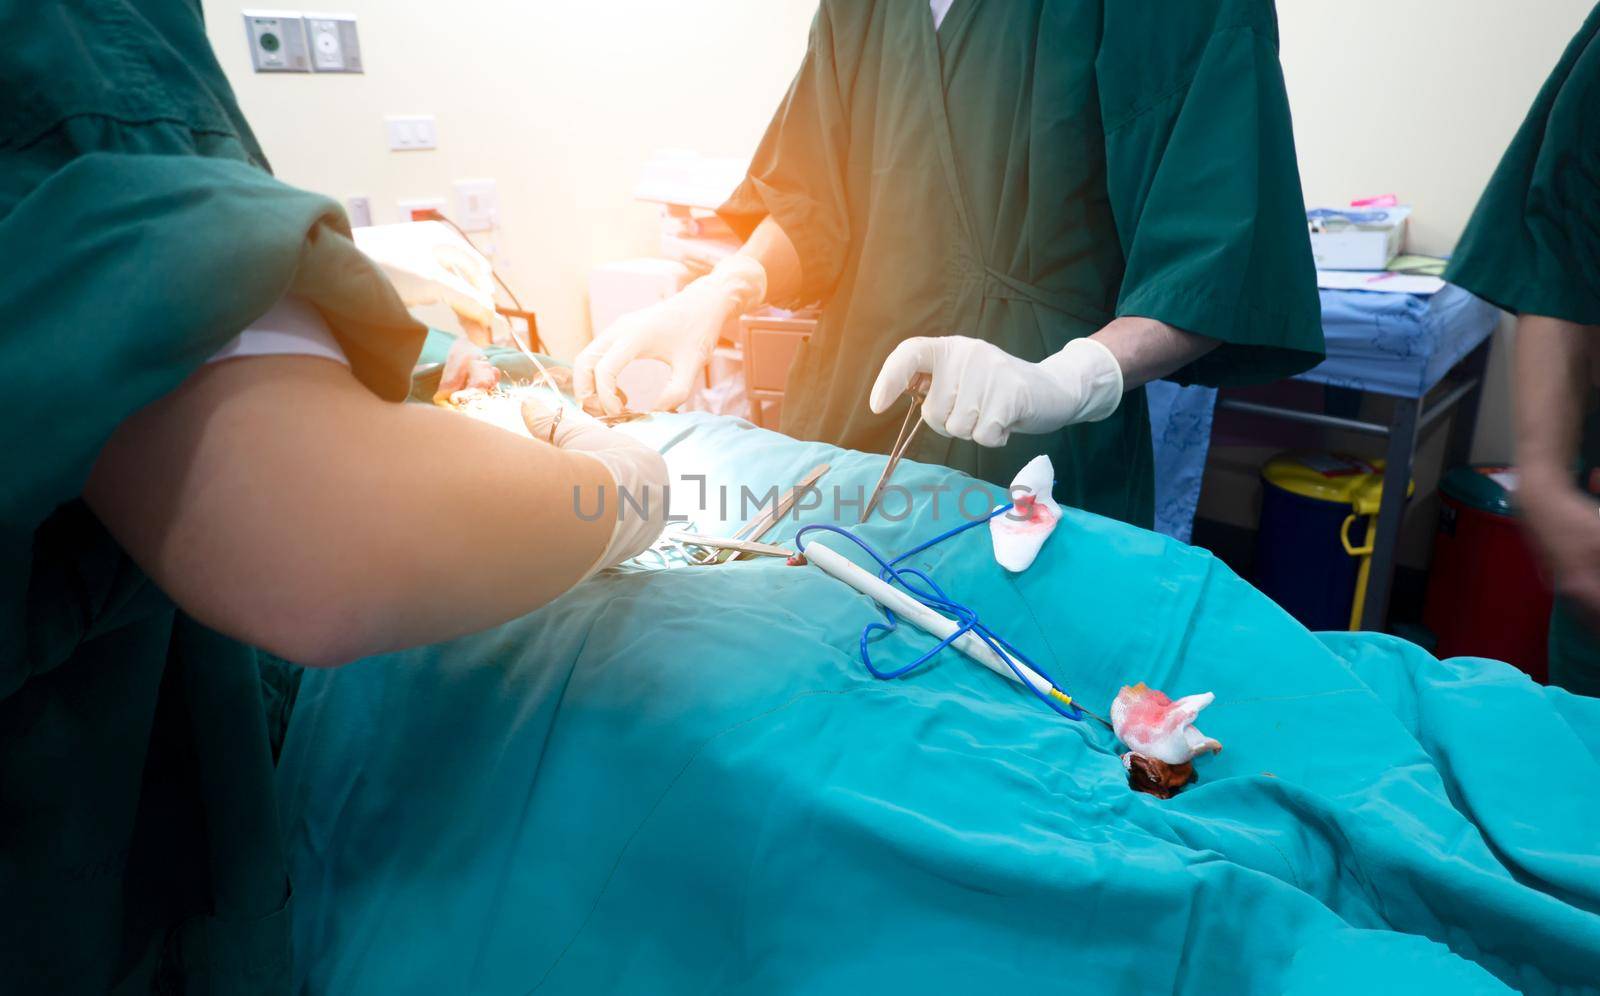 Midsection of surgery team operating Medical Team Performing Surgical Operation in Modern Operating Room
or Group of surgeons in operating room with surgery equipment.